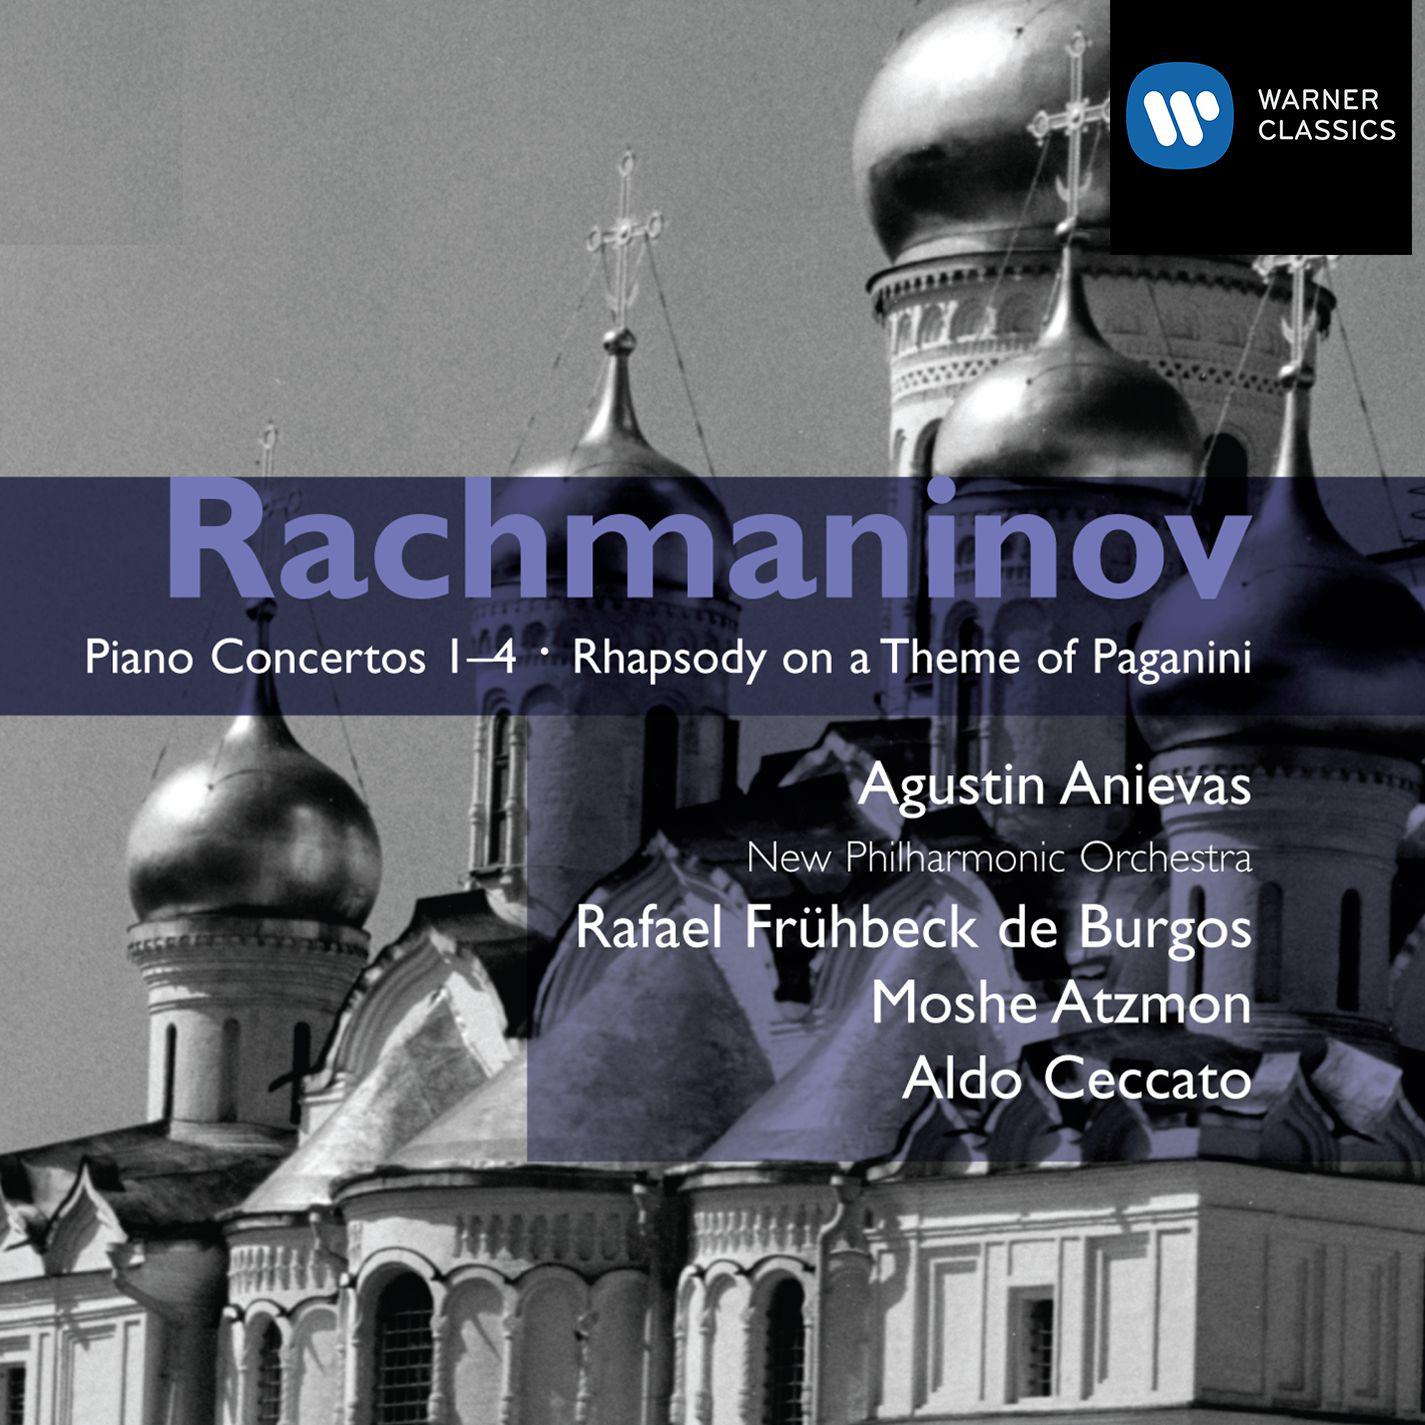 Rhapsody on a Theme of Paganini, Op. 43:Variation XIV. L'istesso tempo